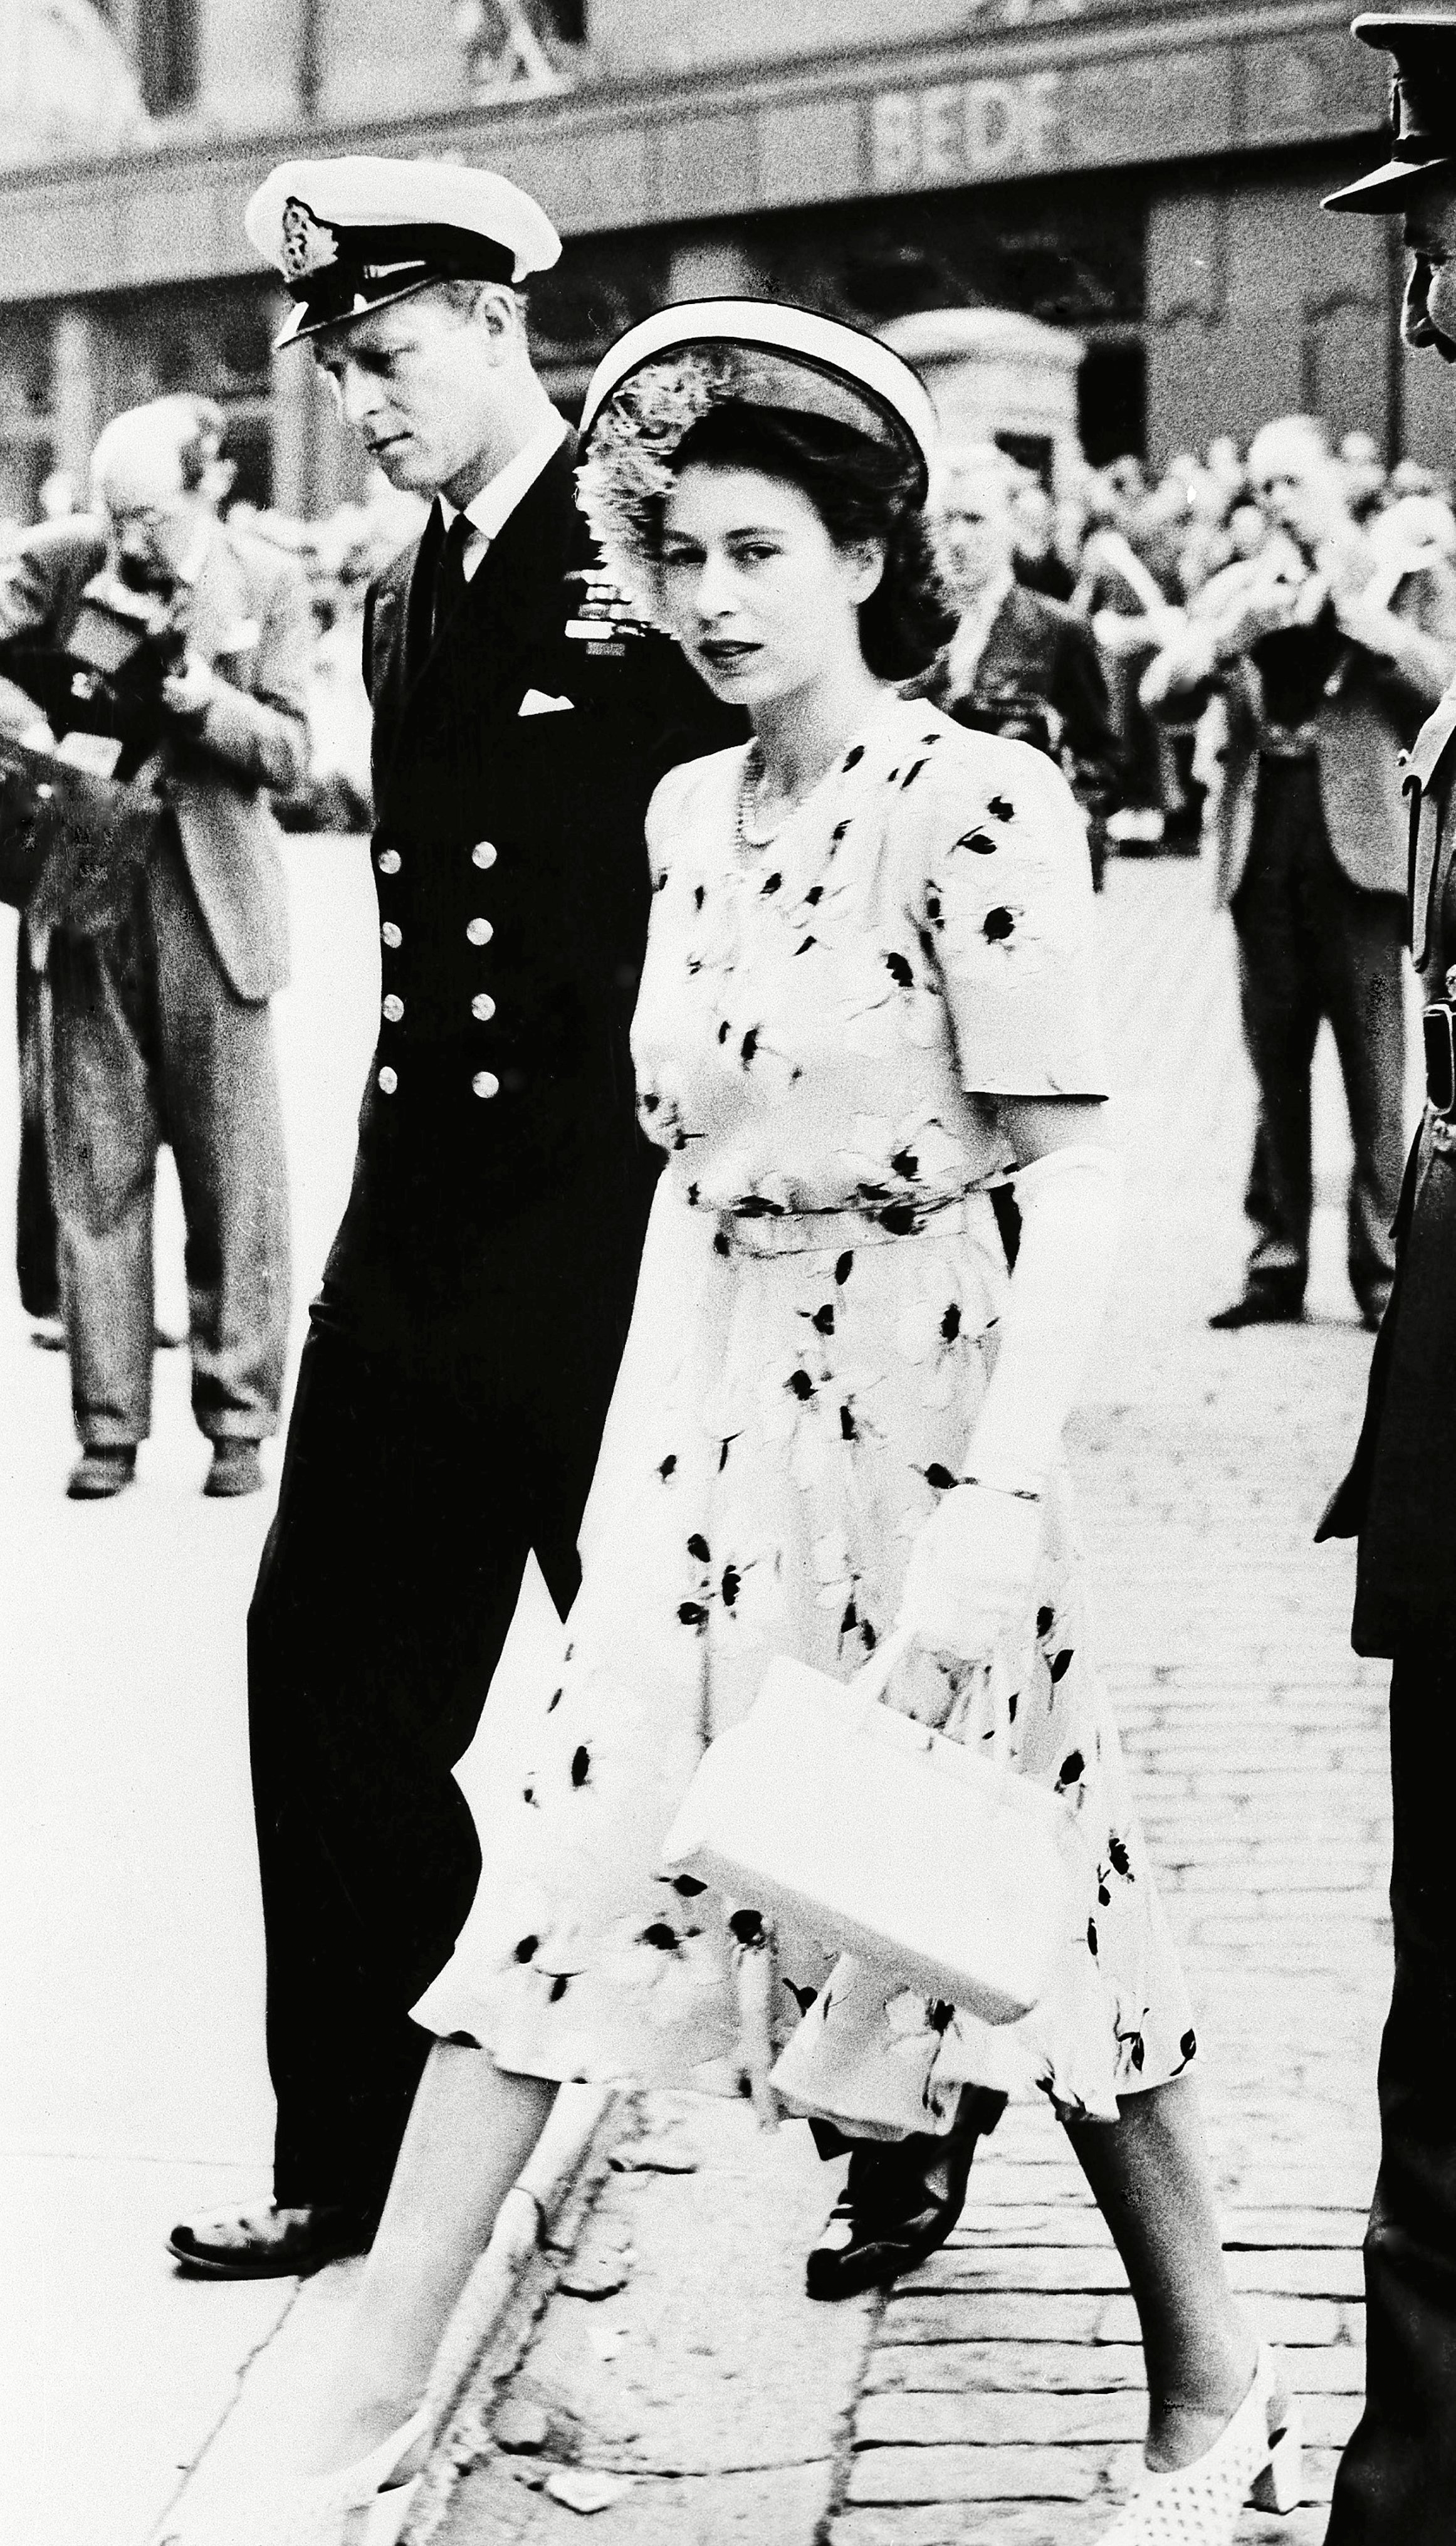 <p>One week after their engagement was announced publicly, Princess Elizabeth was joined by Lt. Philip Mountbatten at Usher Hall in Edinburgh, Scotland, following a presentation party held by her parents, King George VI and Queen Elizabeth, for 800 guests at the Palace of Holyrood House on July 16, 1947.</p>